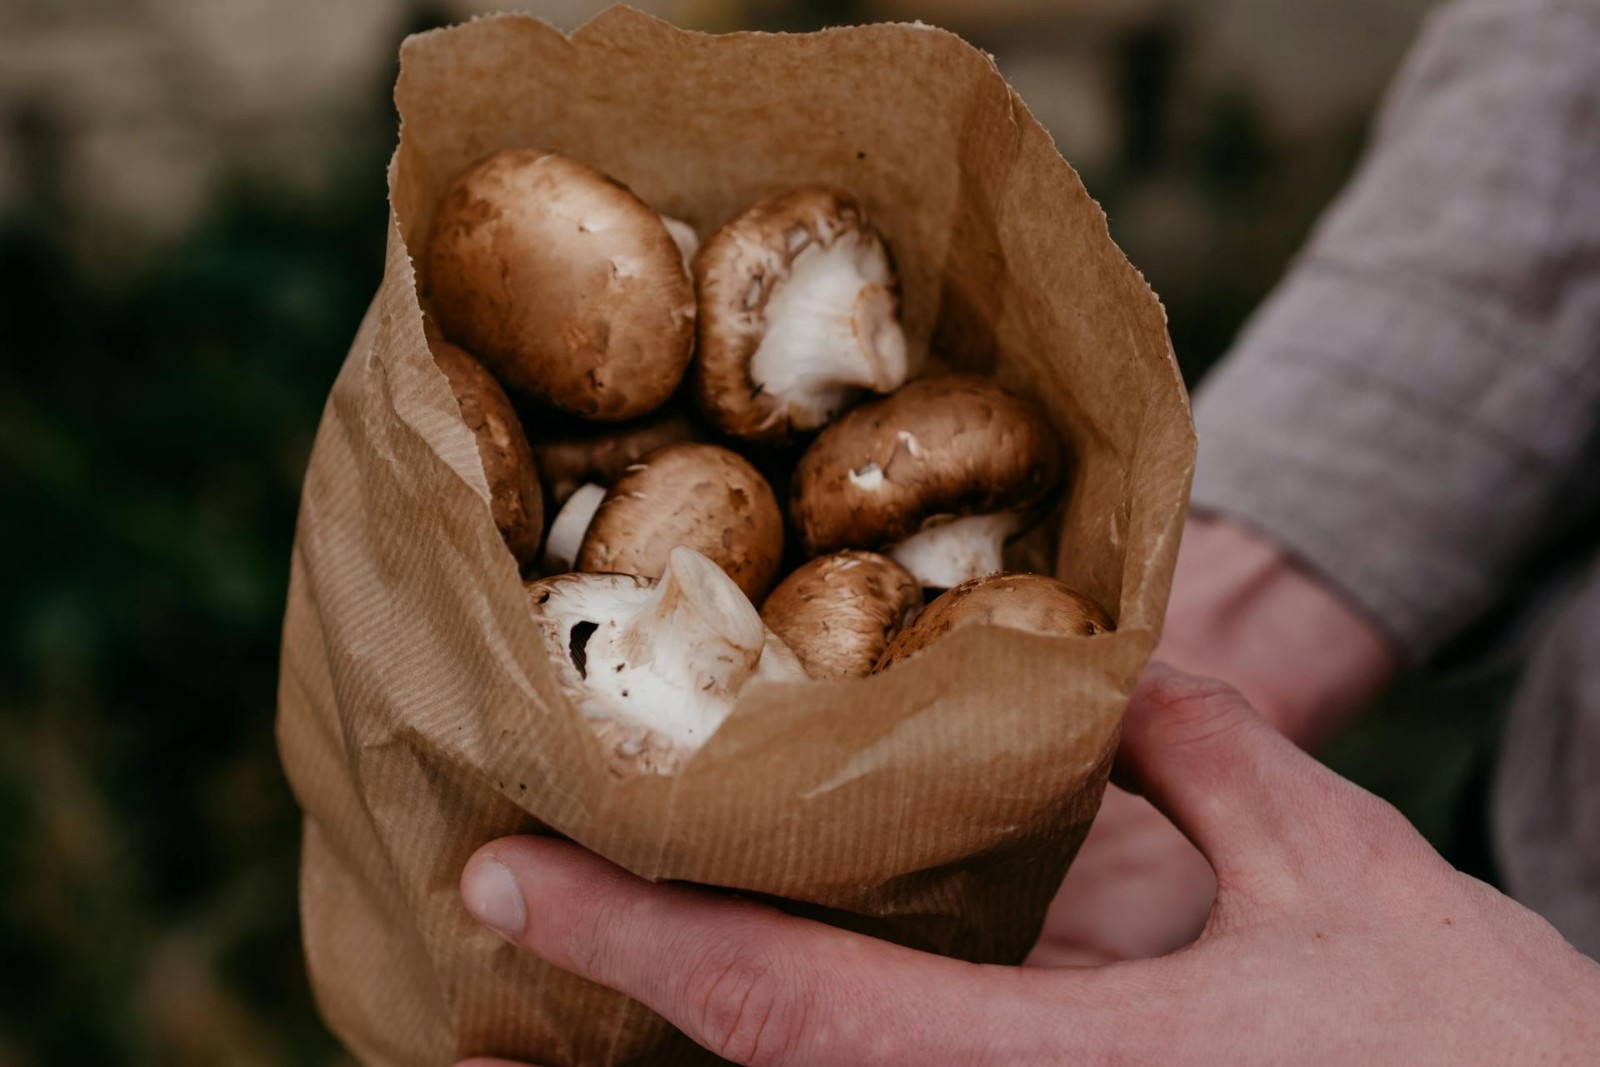 A man holding a paper bag of mushrooms.